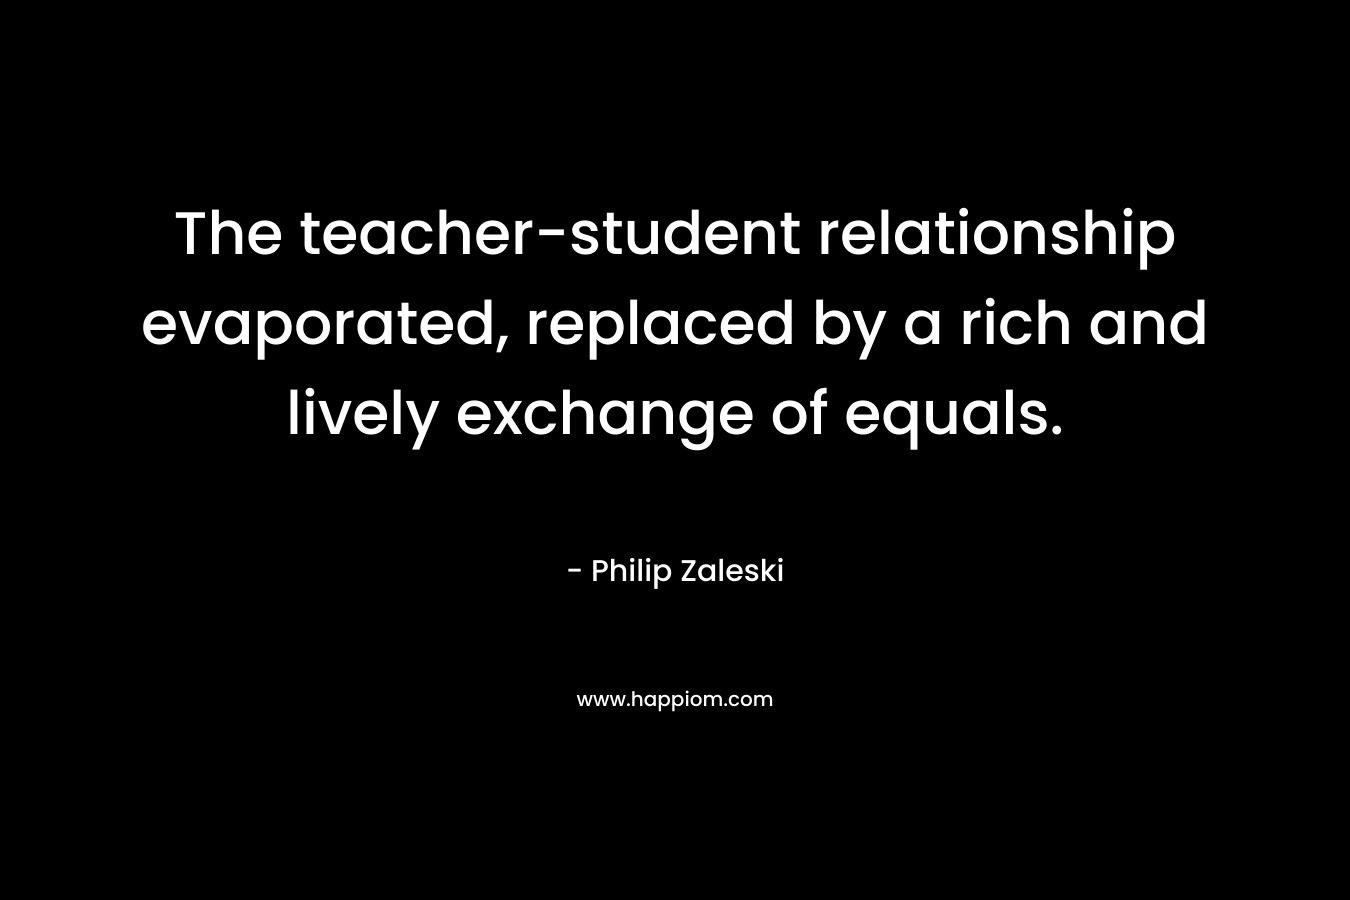 The teacher-student relationship evaporated, replaced by a rich and lively exchange of equals.